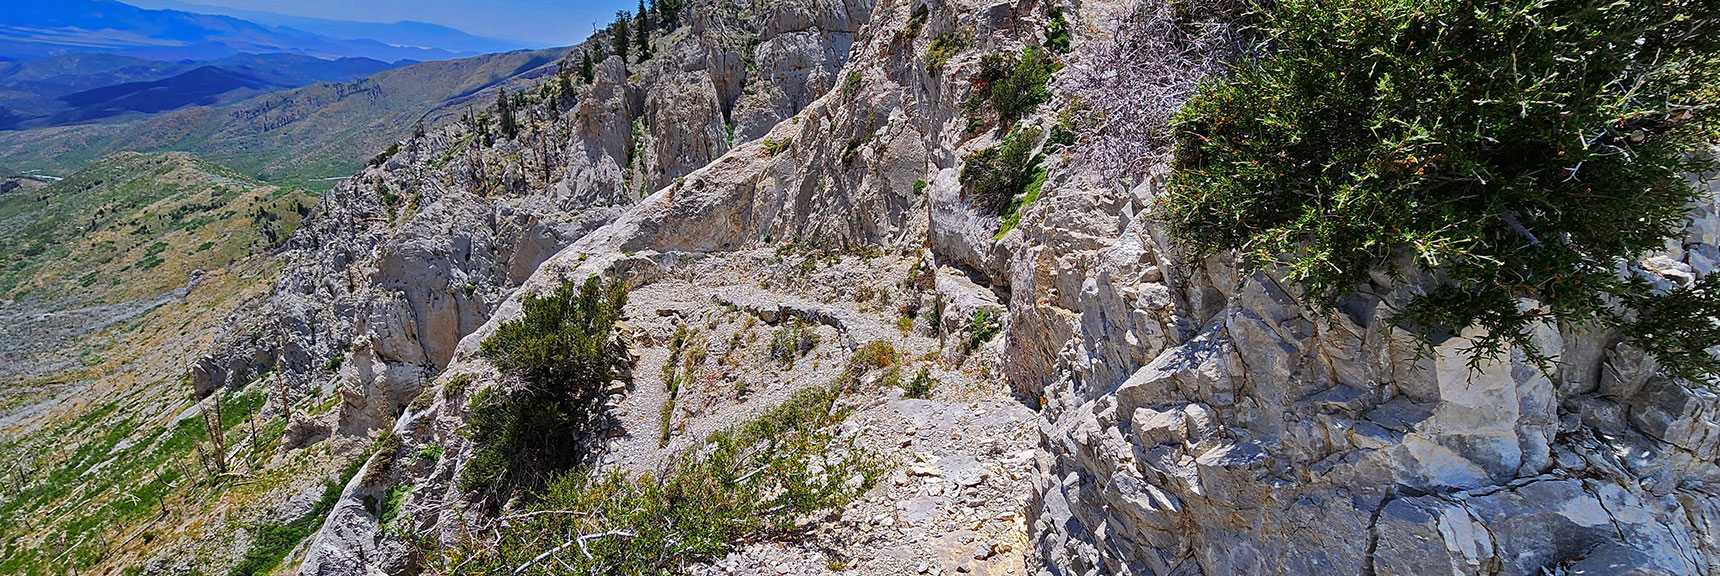 Cliffs That Looked Like an Impossible Barrier from a Distance Are Made Easy. | Fletcher Canyon Trailhead to Harris Mountain Summit to Griffith Peak Summit Circuit Adventure | Mt. Charleston Wilderness, Nevada